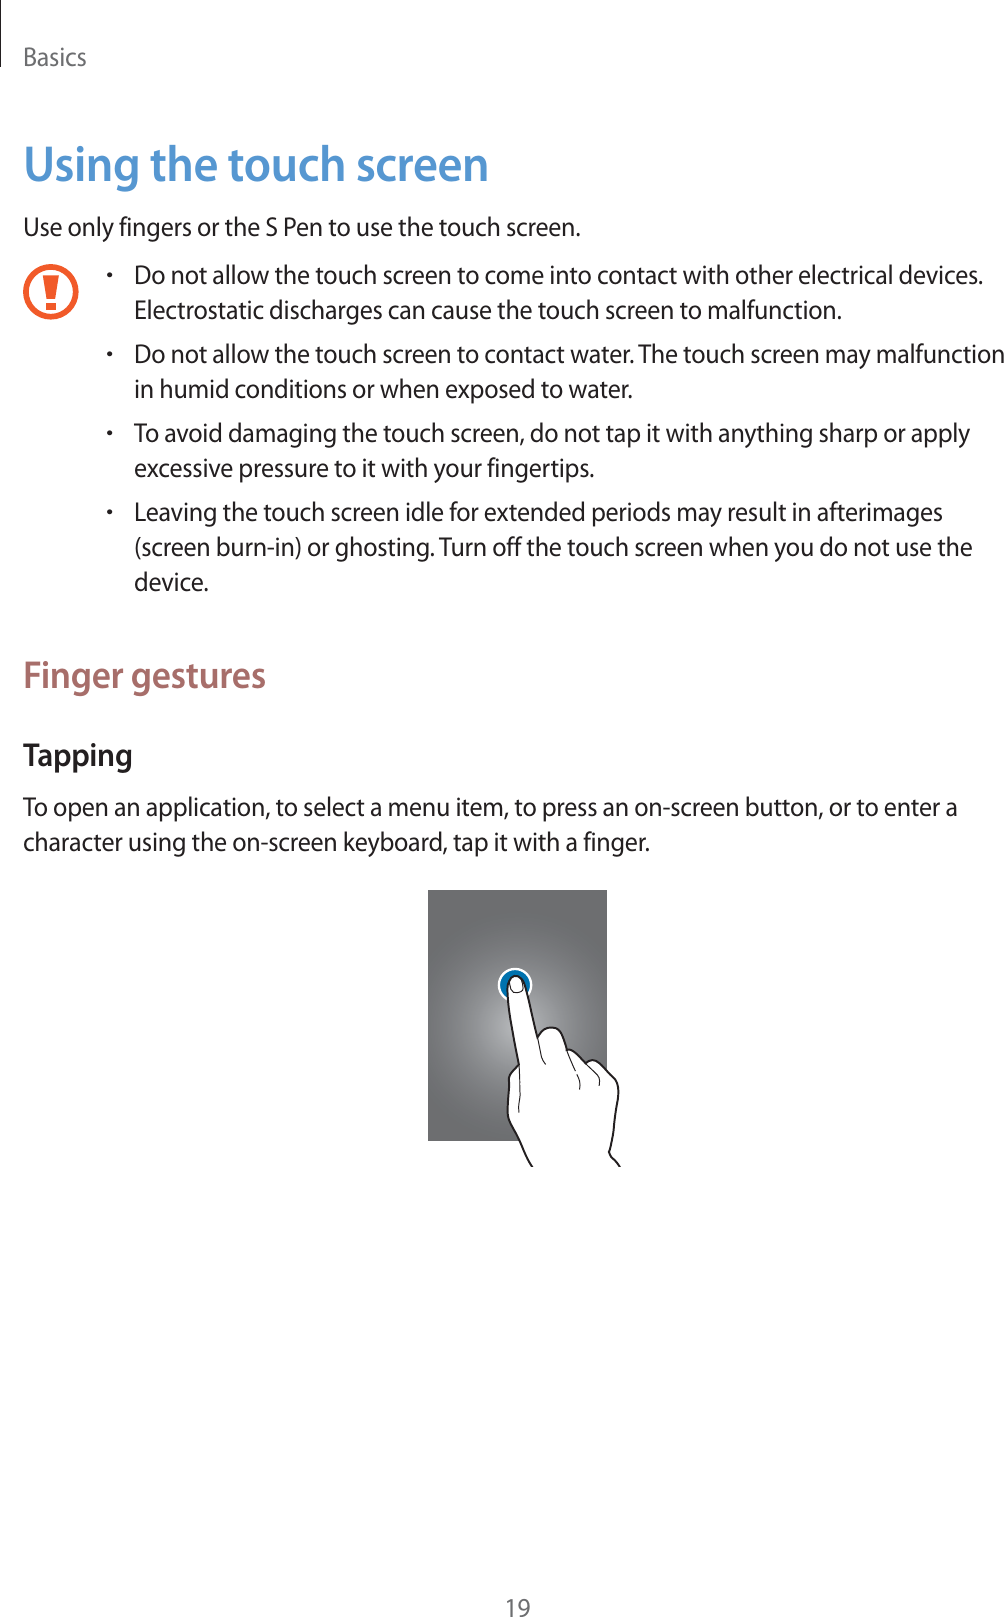 Basics19Using the touch screenUse only fingers or the S Pen to use the touch screen.rDo not allow the touch screen to come into contact with other electrical devices. Electrostatic discharges can cause the touch screen to malfunction.rDo not allow the touch screen to contact water. The touch screen may malfunction in humid conditions or when exposed to water.rTo avoid damaging the touch screen, do not tap it with anything sharp or apply excessive pressure to it with your fingertips.rLeaving the touch screen idle for extended periods may result in afterimages (screen burn-in) or ghosting. Turn off the touch screen when you do not use the device.Finger gesturesTappingTo open an application, to select a menu item, to press an on-screen button, or to enter a character using the on-screen keyboard, tap it with a finger.